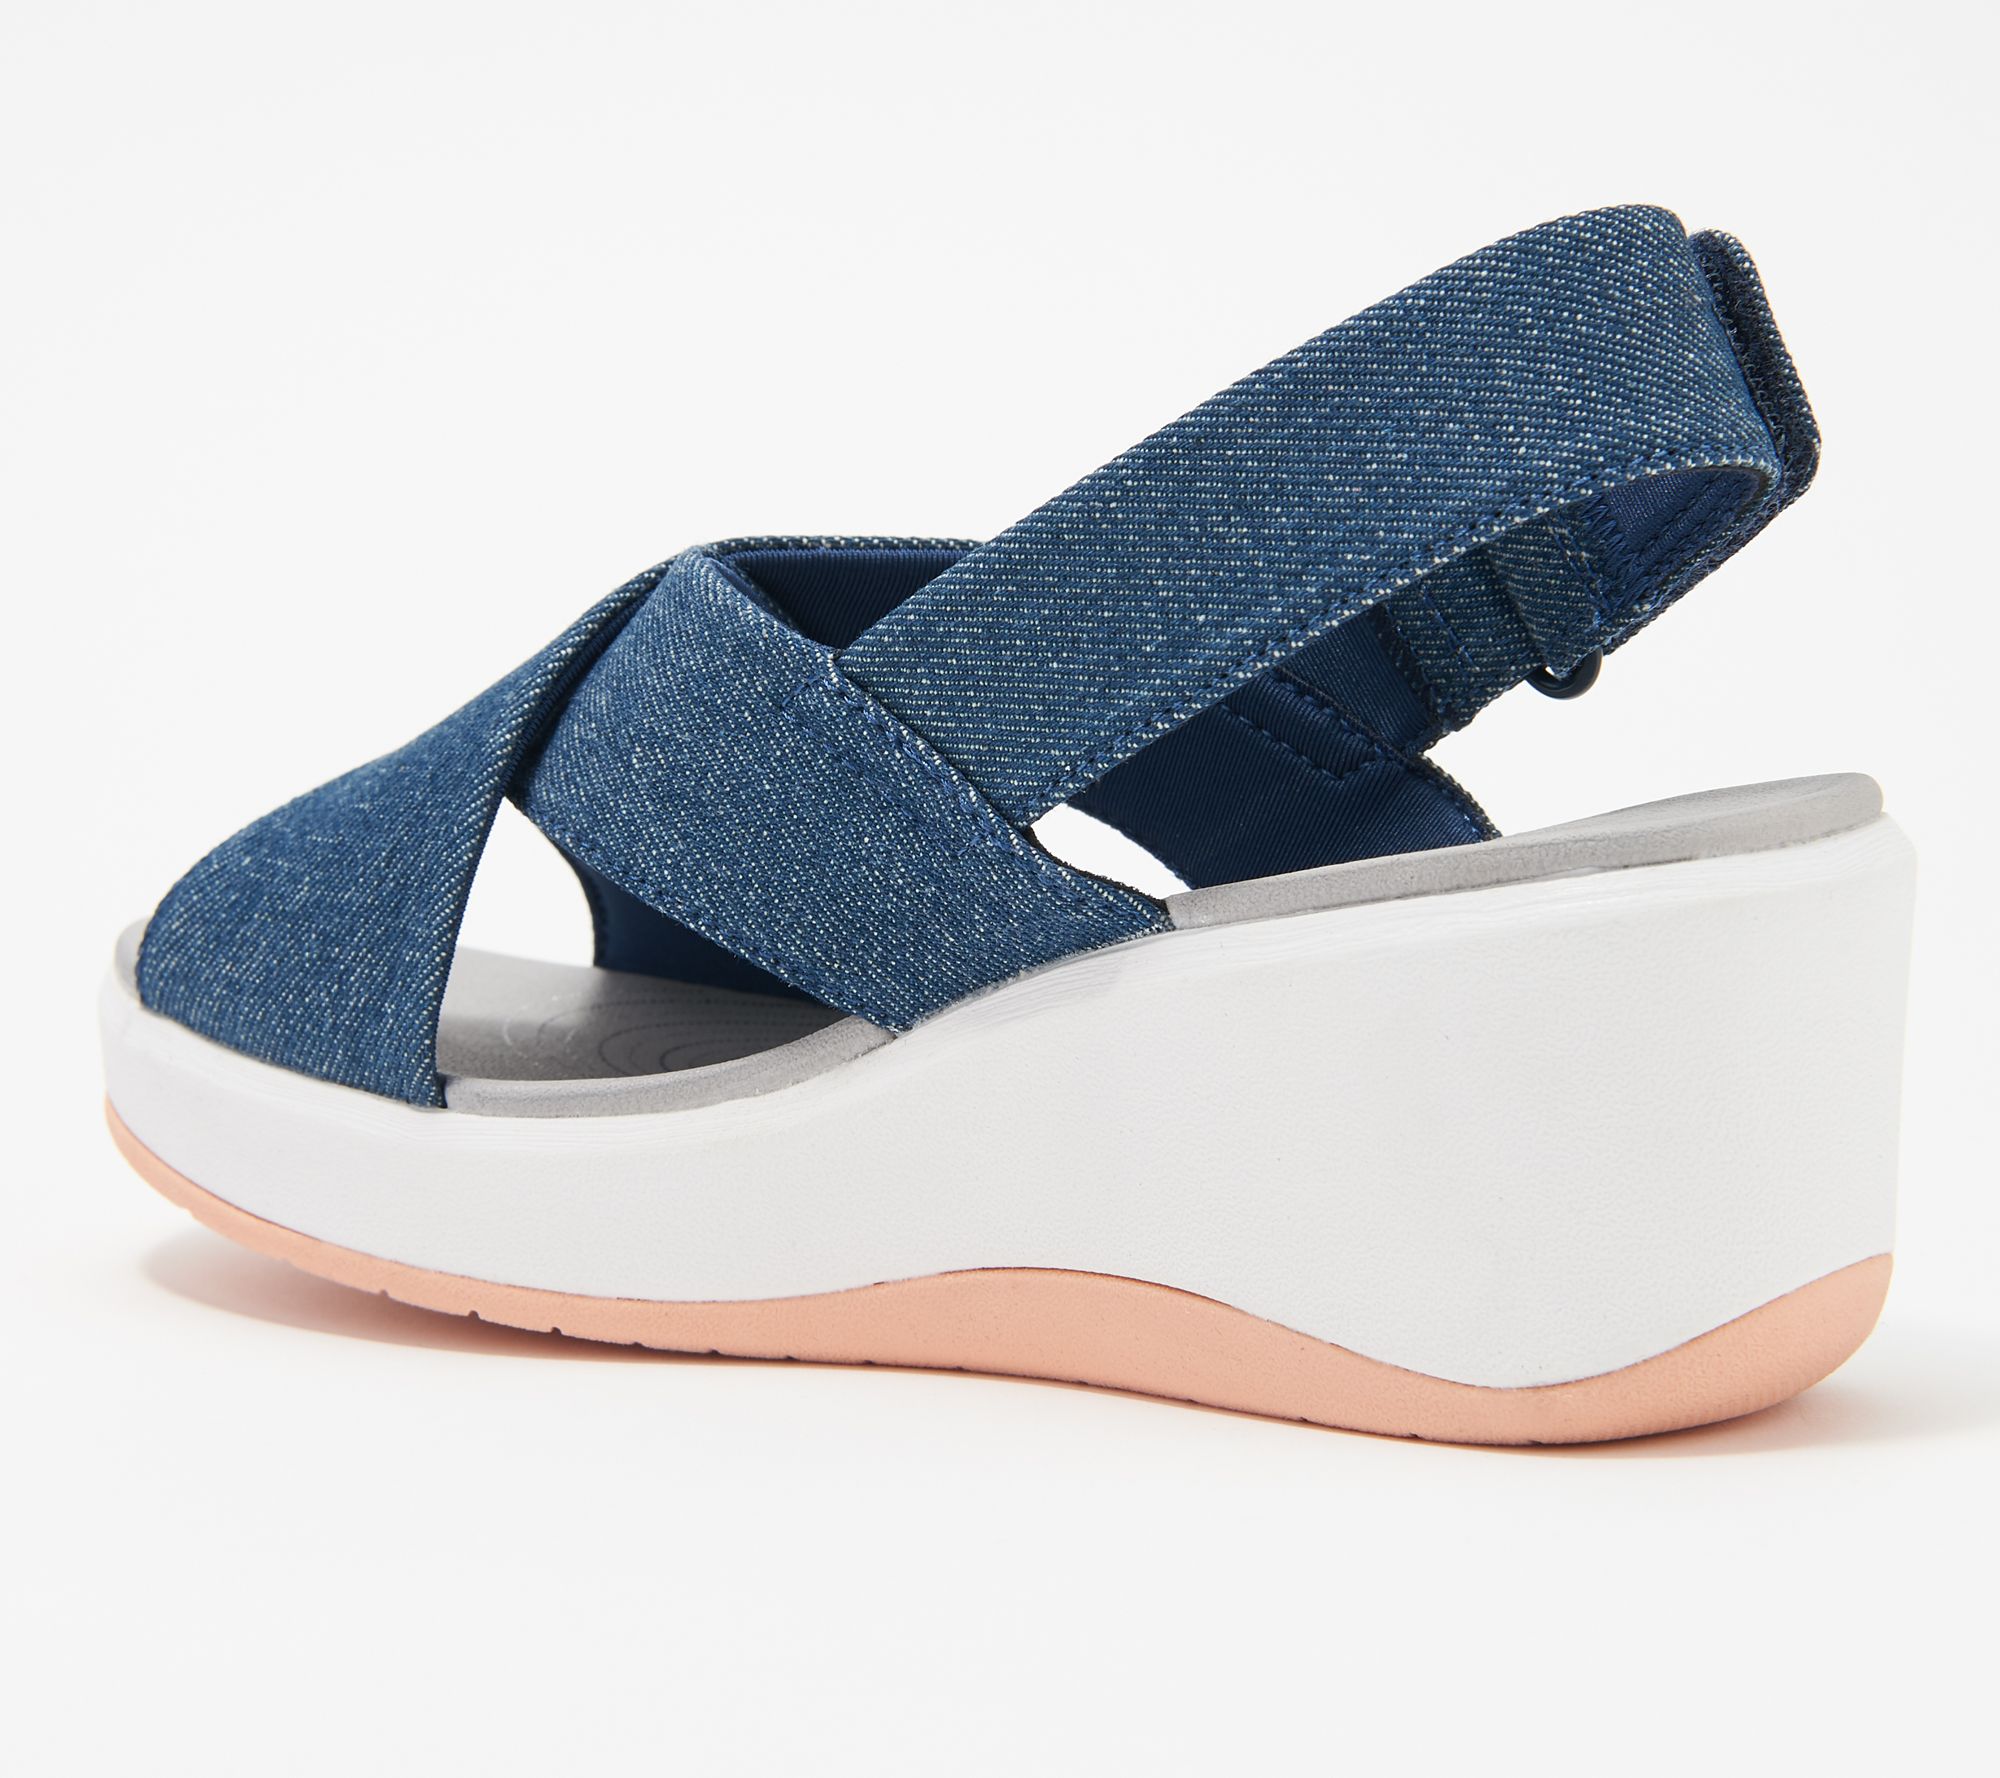 CLOUDSTEPPERS by Clarks Cross-Strap Wedges - Step Cali Cove - QVC.com